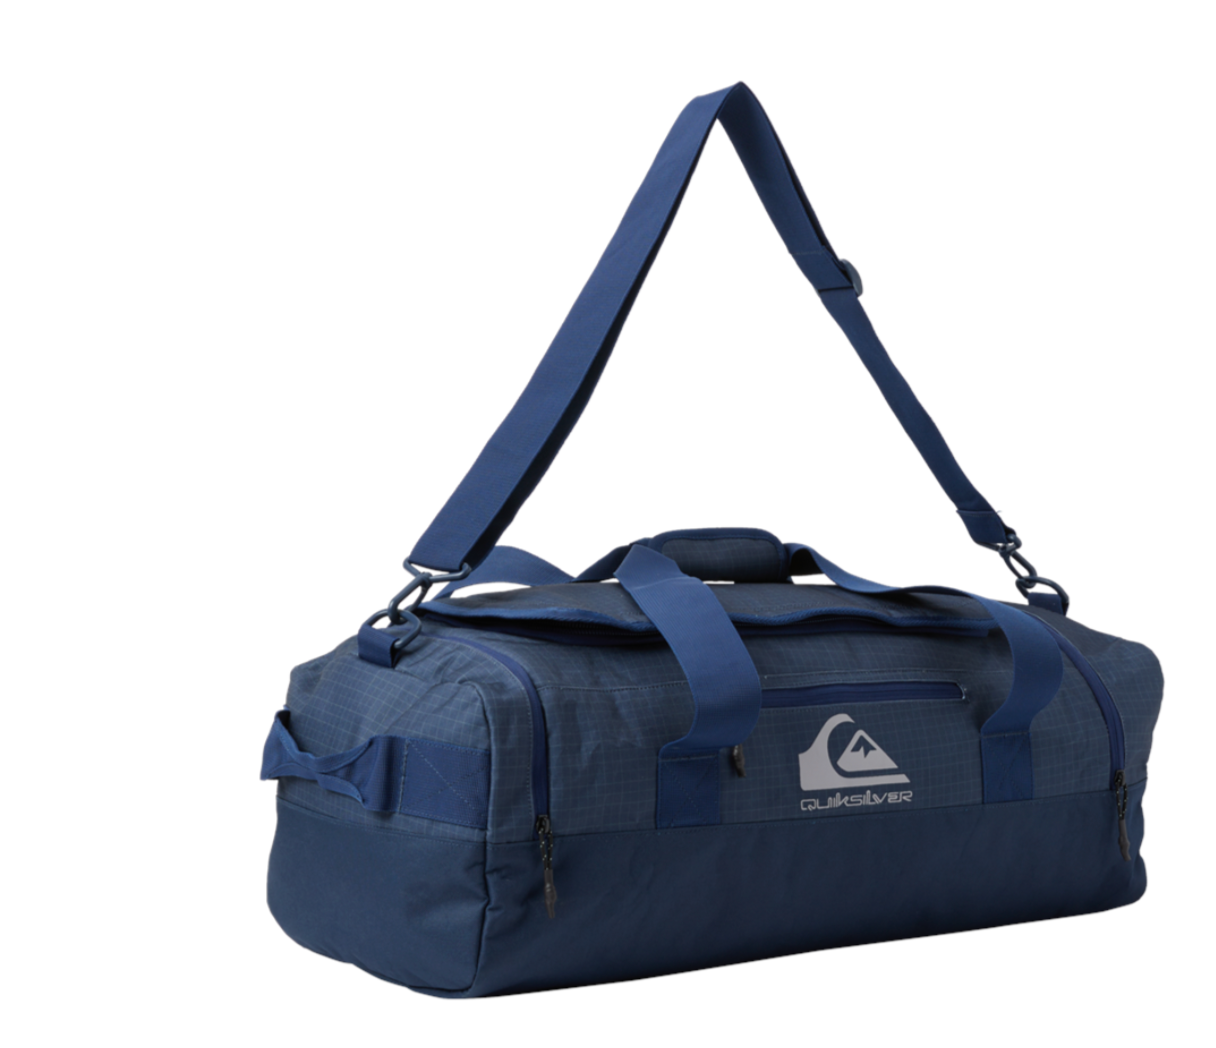 QUIKSILVER SHELTER 40L DUFFLE - NAVAL ACADEMY